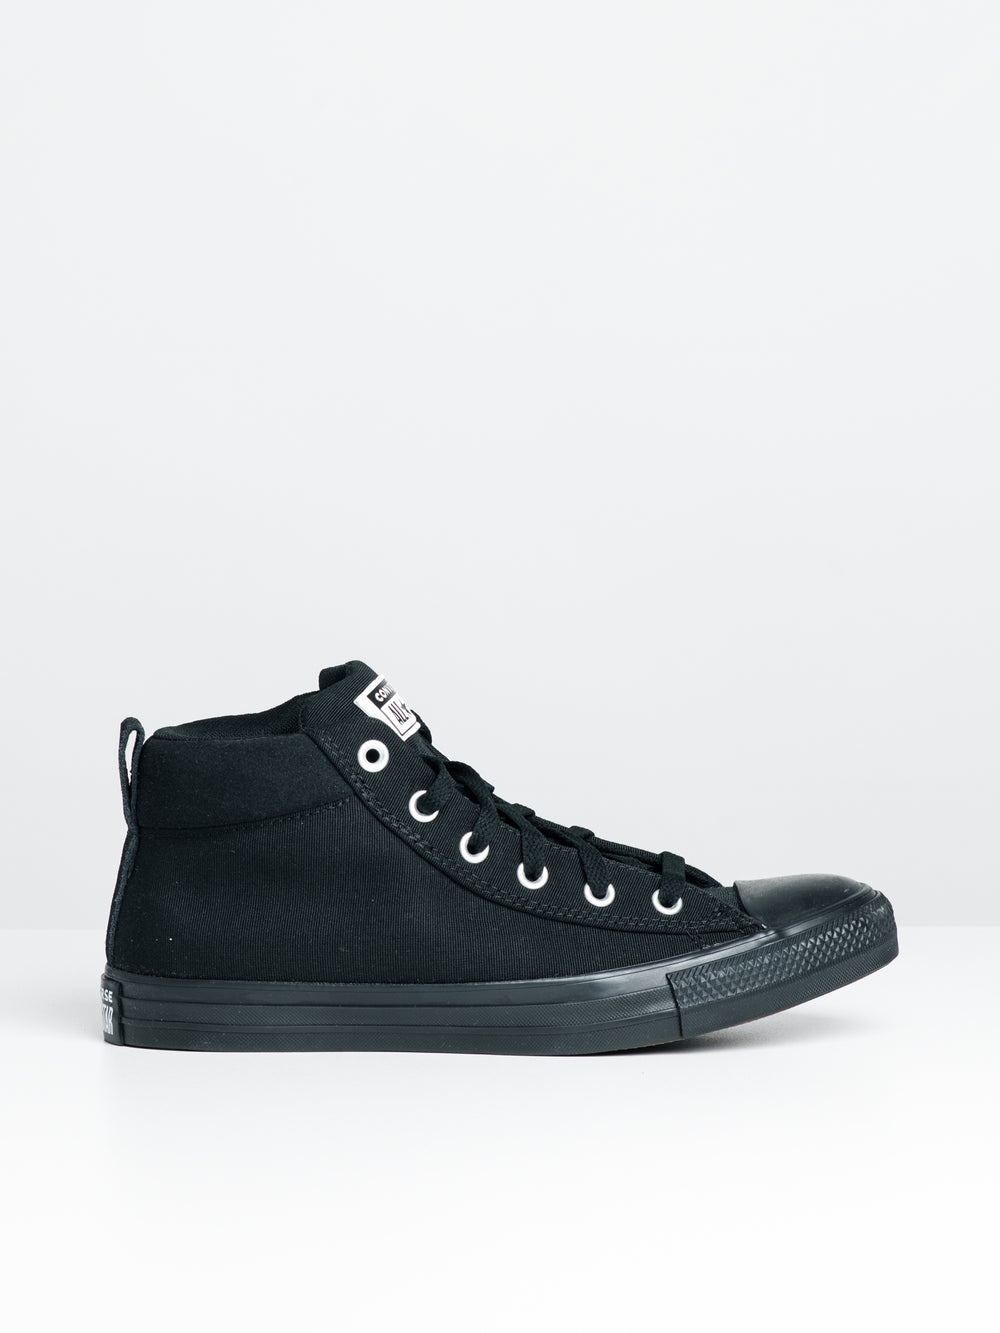 CONVERSE CHUCK TAYLOR ALL STAR STREET MID TOP SNEAKERS POUR HOMME - DÉSTOCKAGE